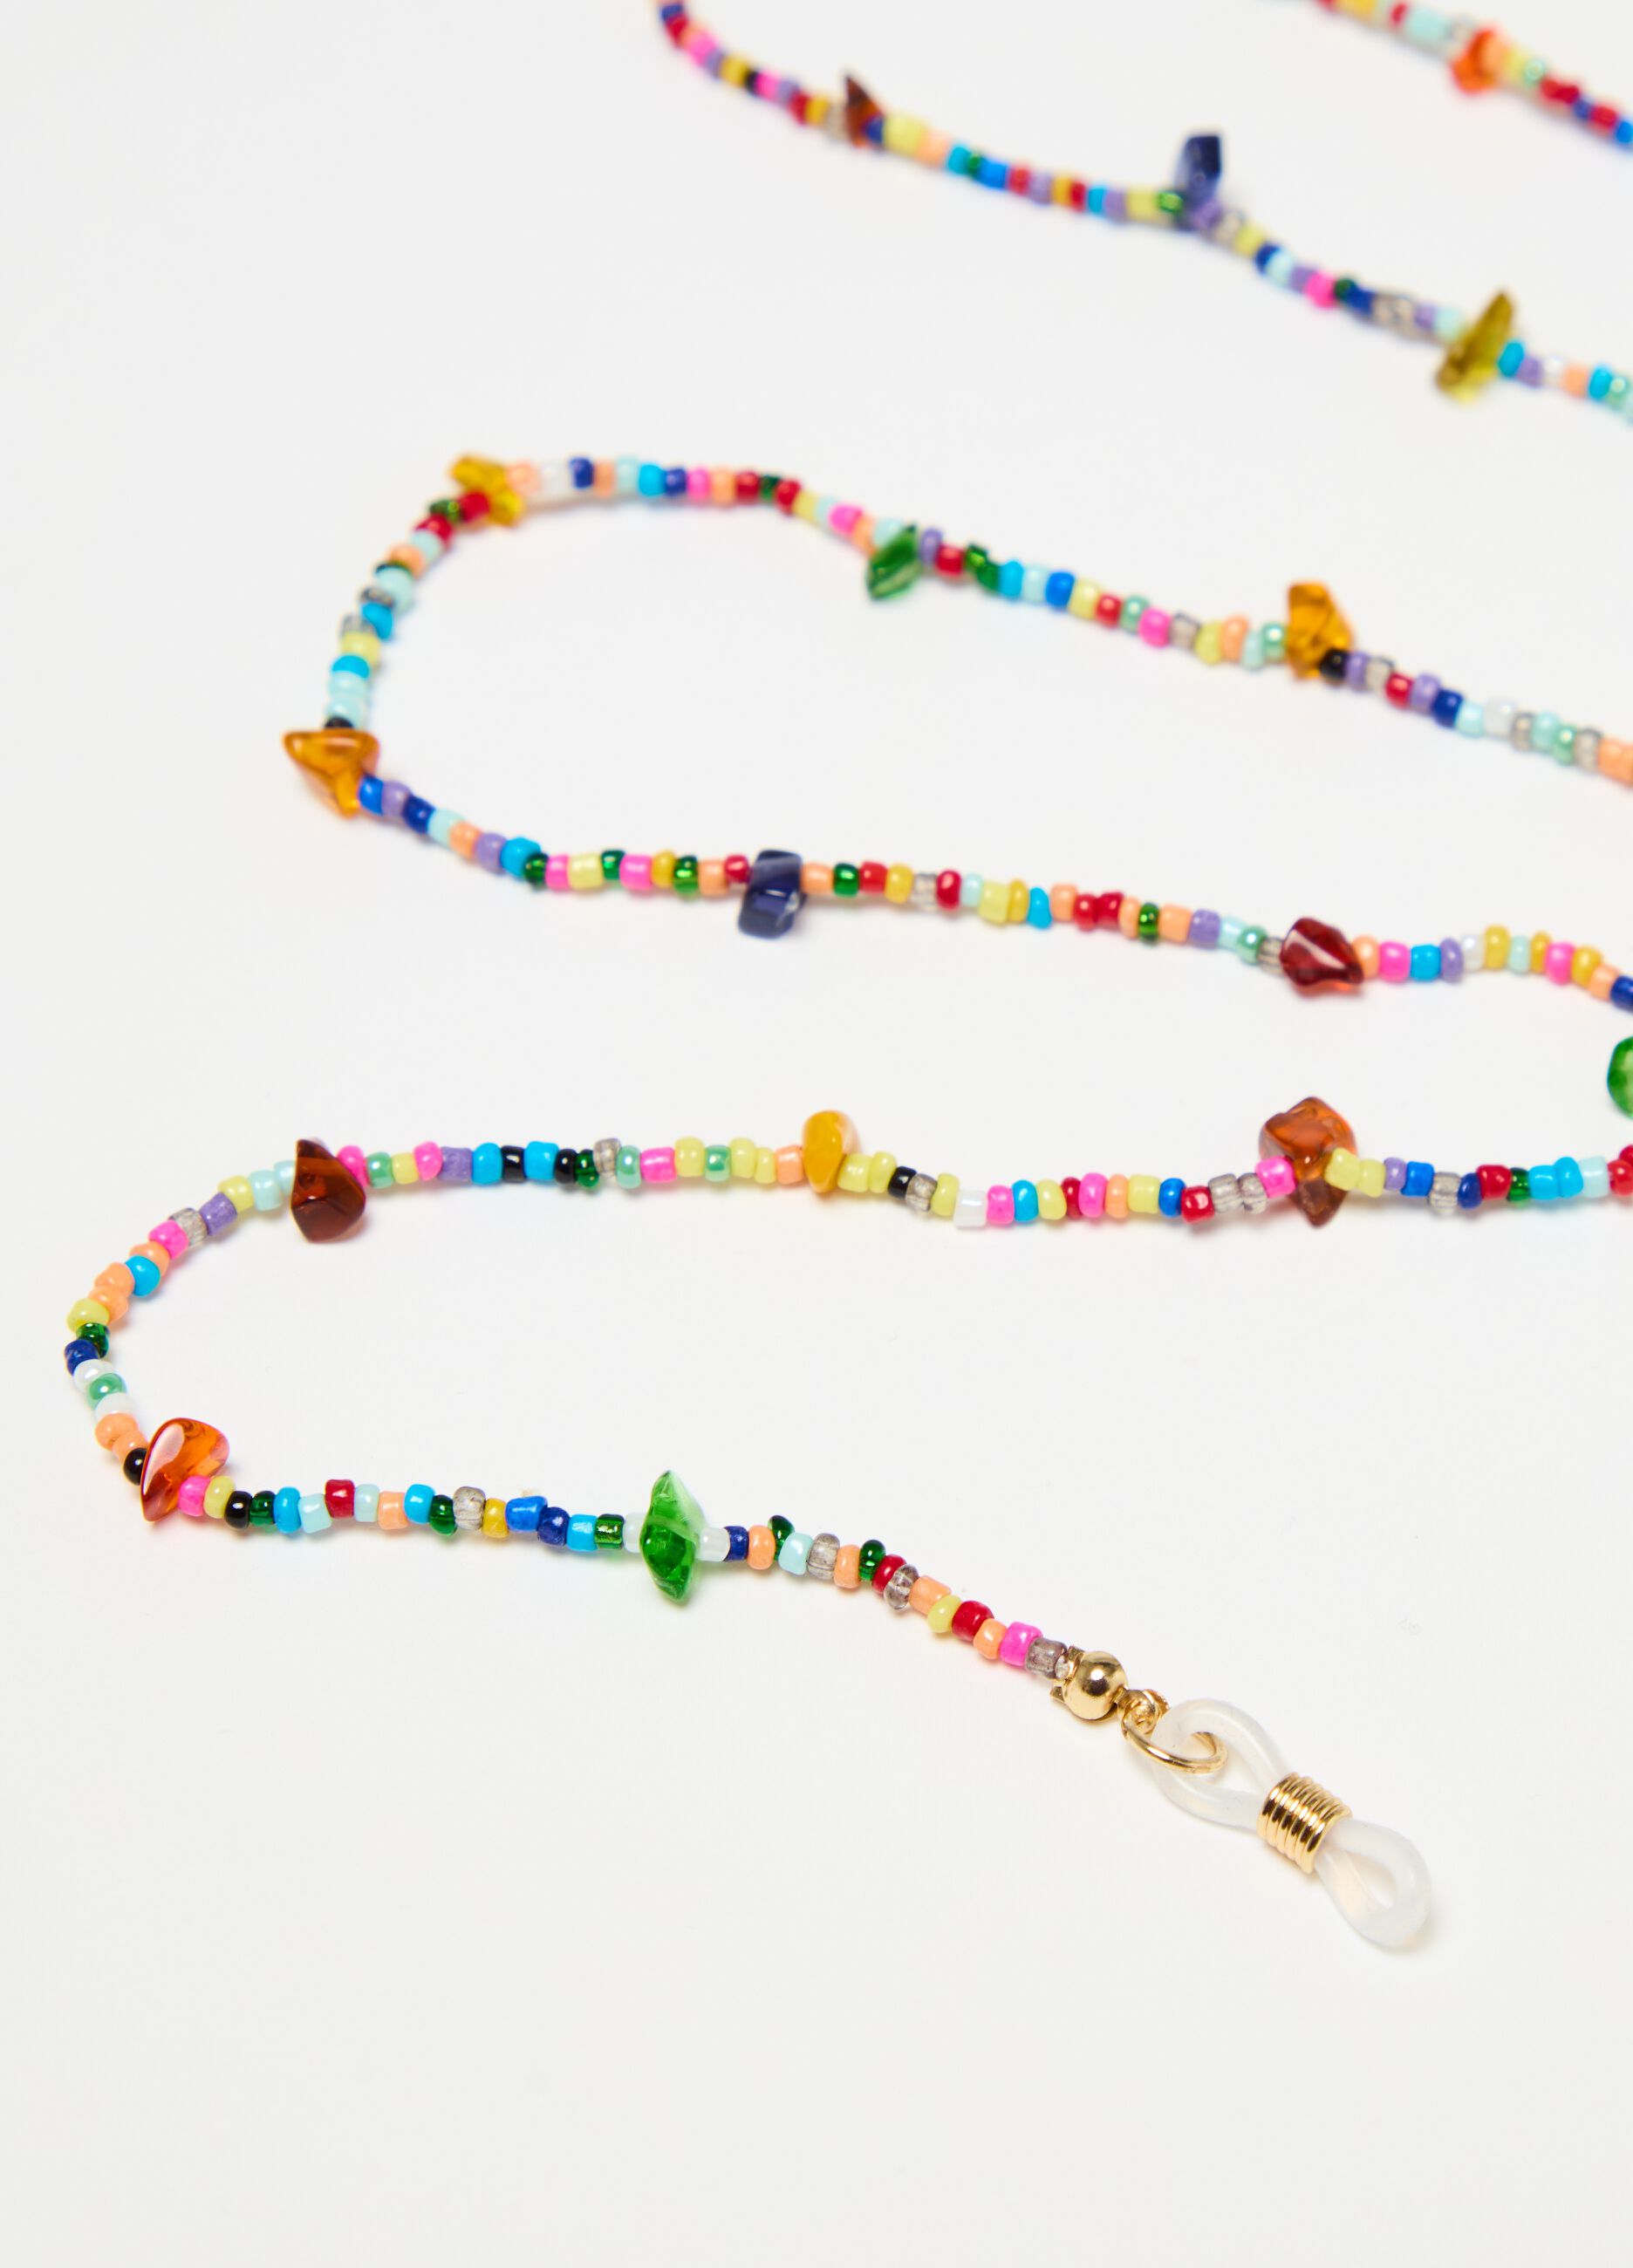 Glasses chain with beads